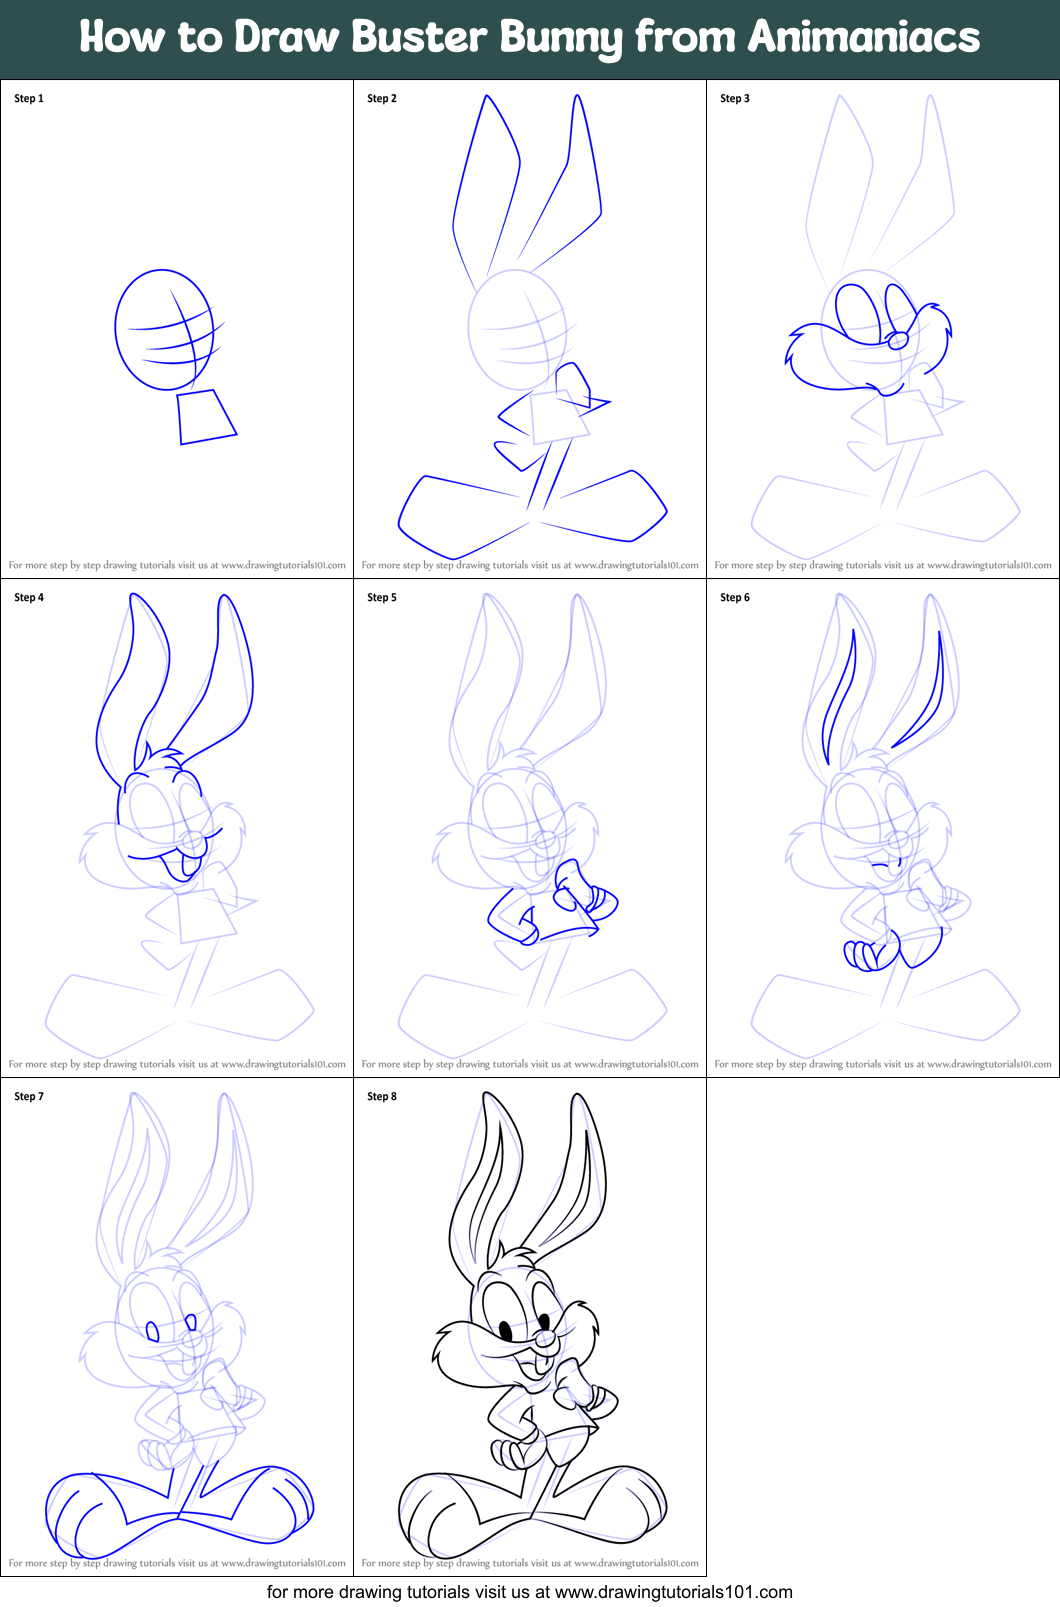 How to Draw Buster Bunny from Animaniacs printable step by step drawing